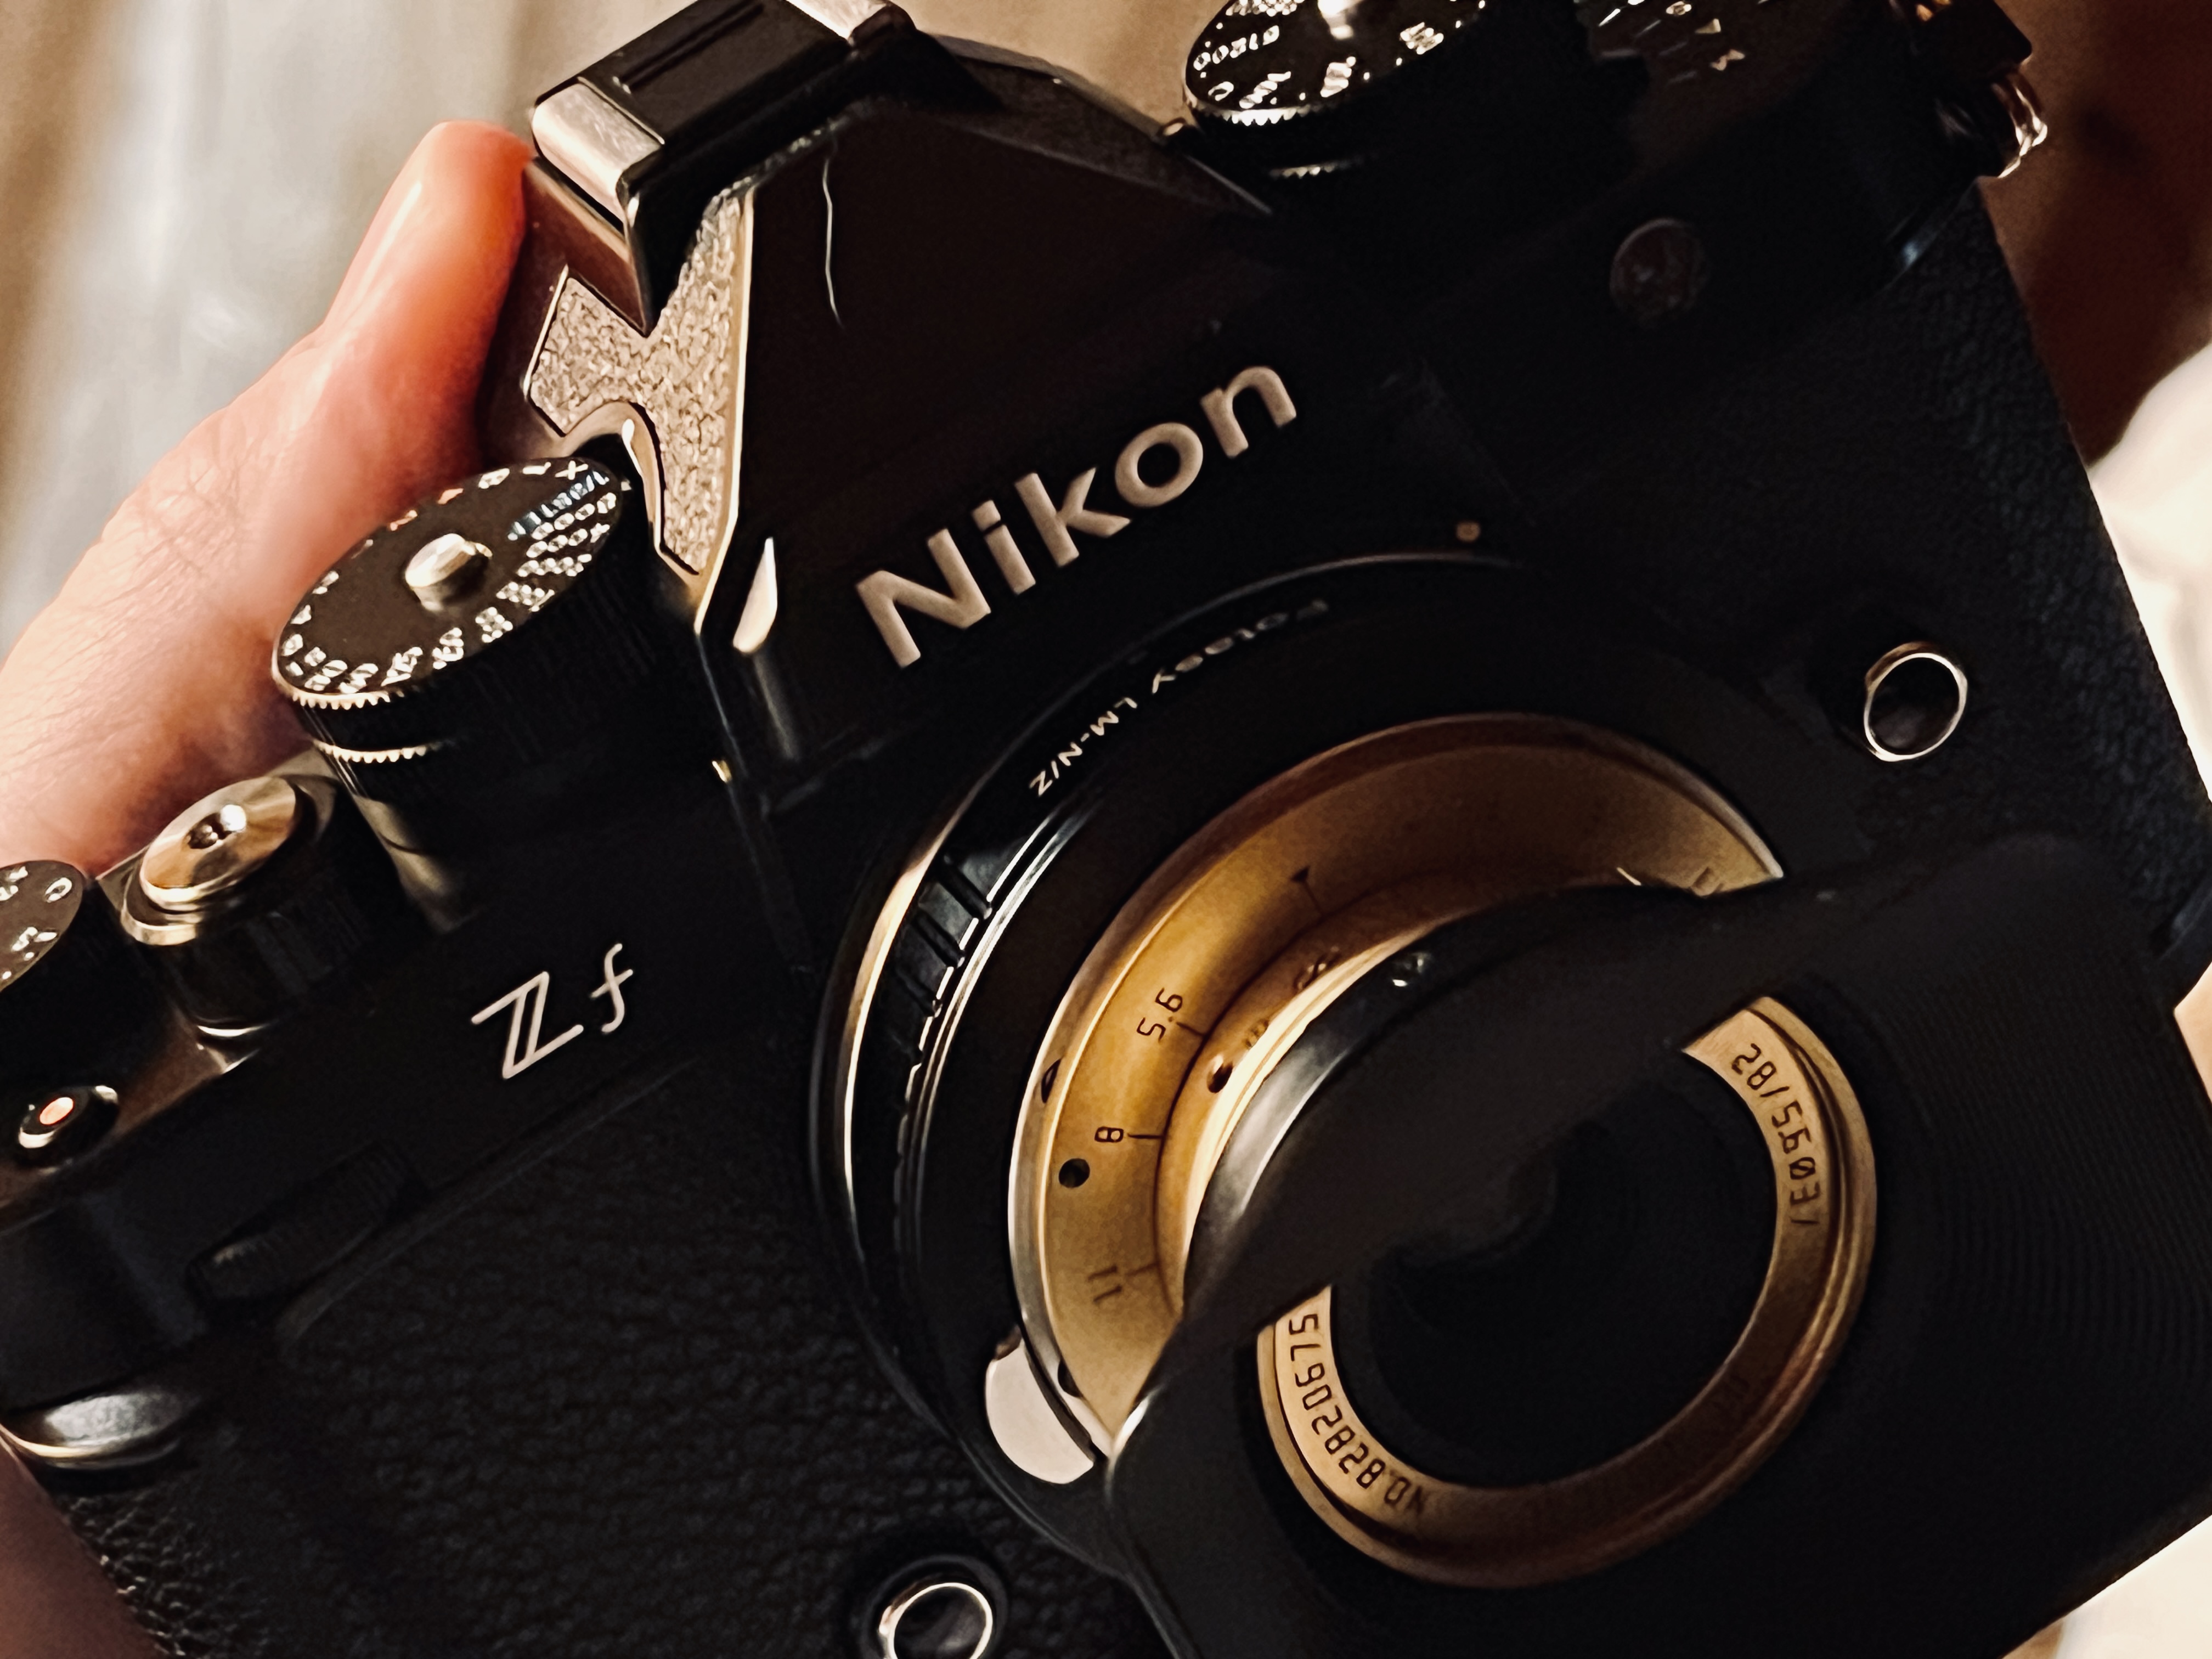 Nikon Zf review: updated with video reel and impressions: Digital